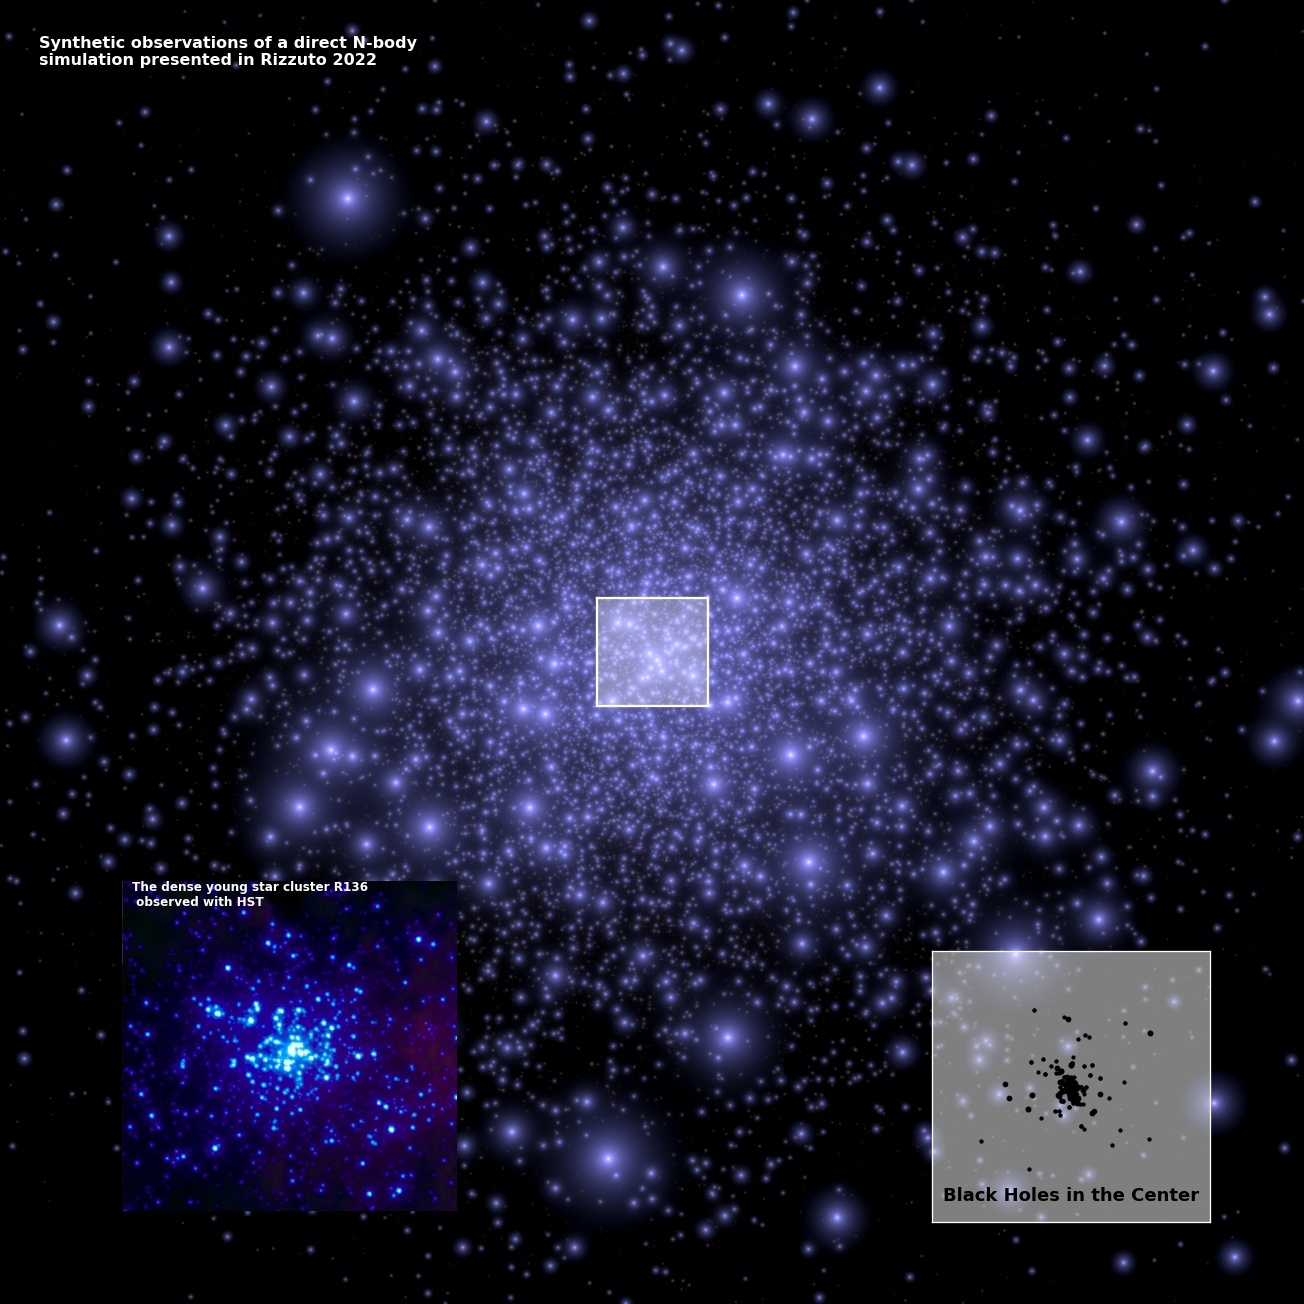 Image of simulated stellar cluster